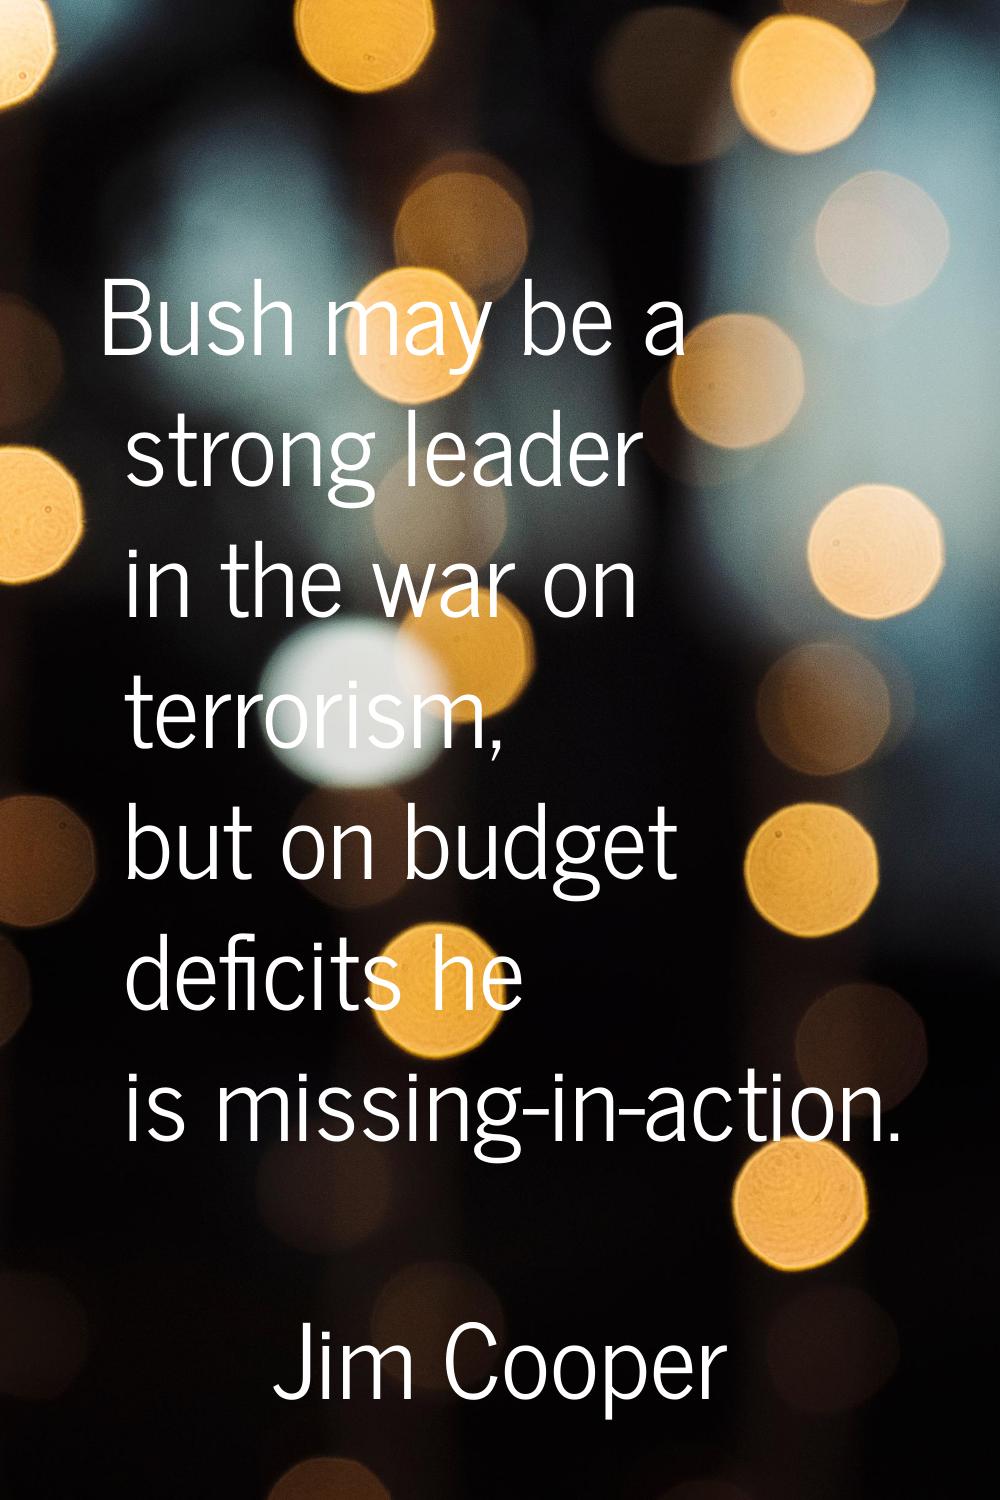 Bush may be a strong leader in the war on terrorism, but on budget deficits he is missing-in-action